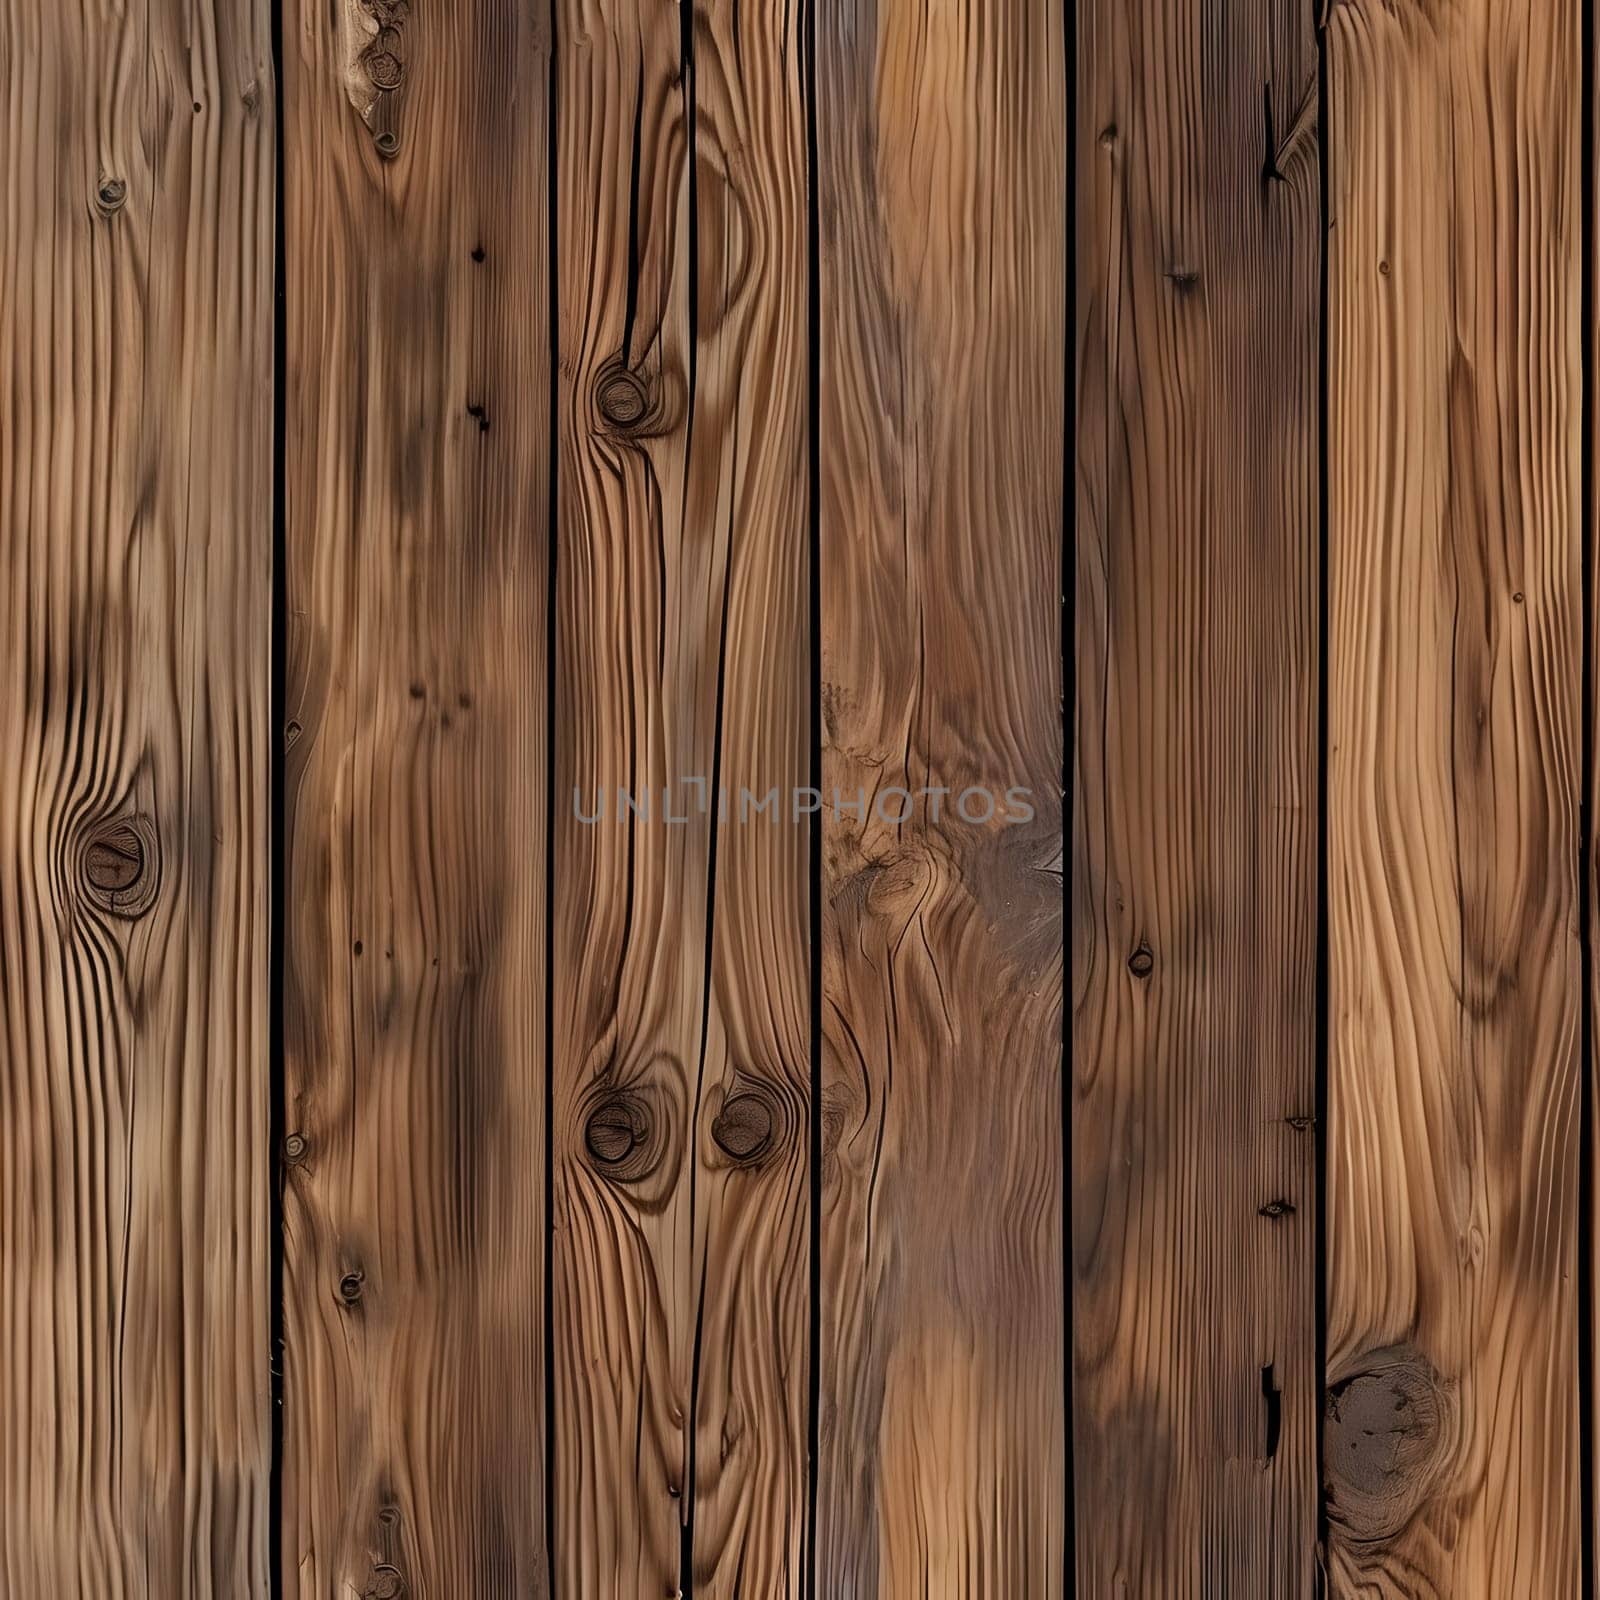 Medium brown wood background. Seamless wooden planks board texture. by z1b